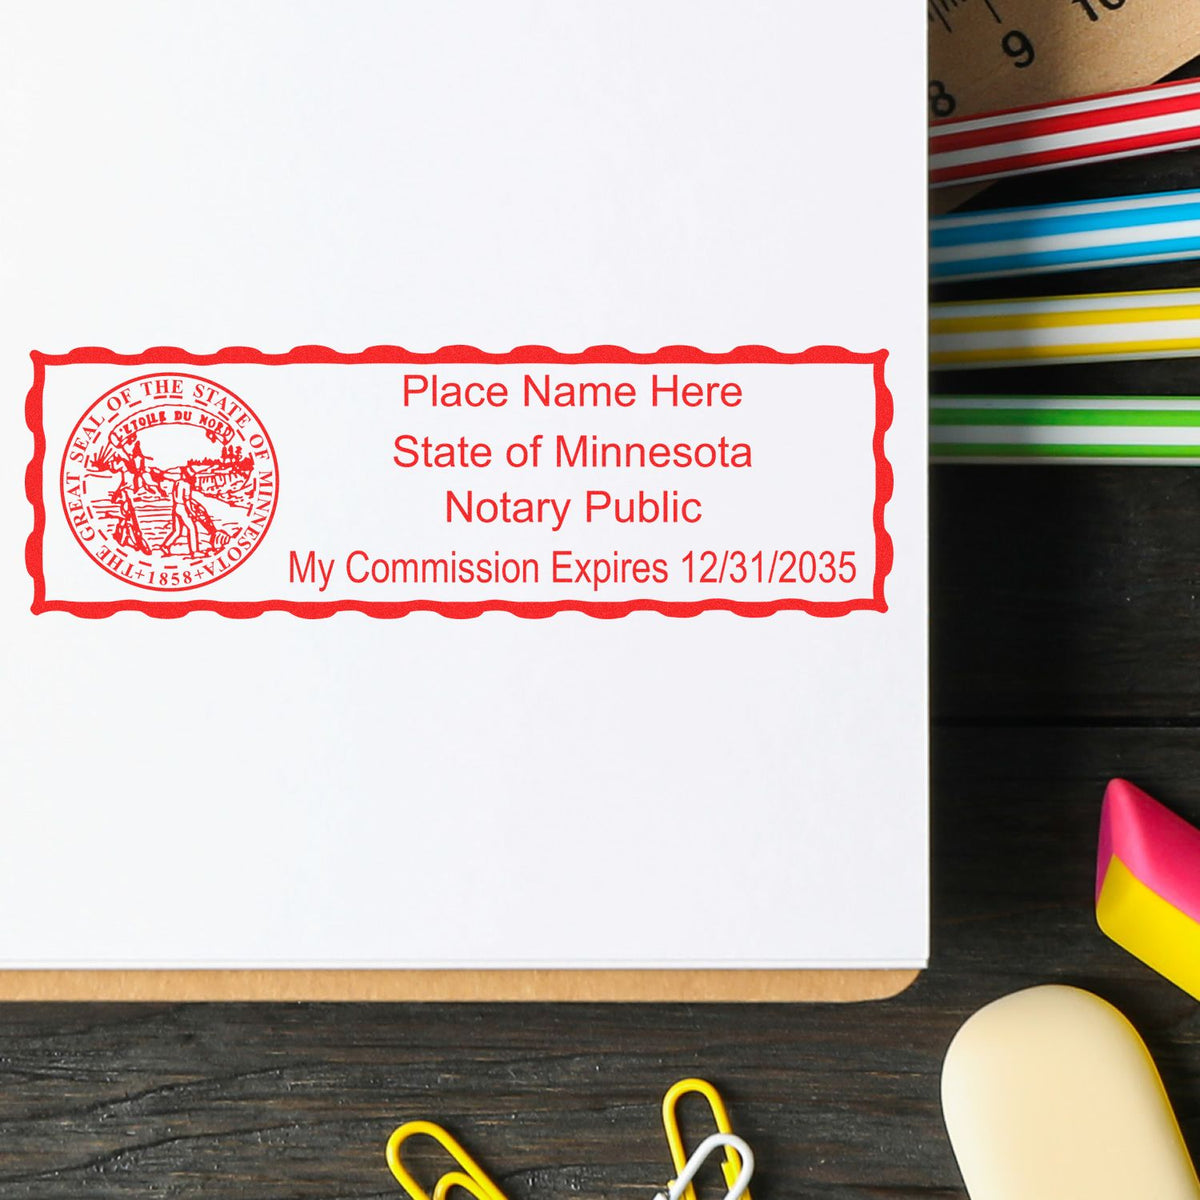 A stamped impression of the Wooden Handle Minnesota State Seal Notary Public Stamp in this stylish lifestyle photo, setting the tone for a unique and personalized product.